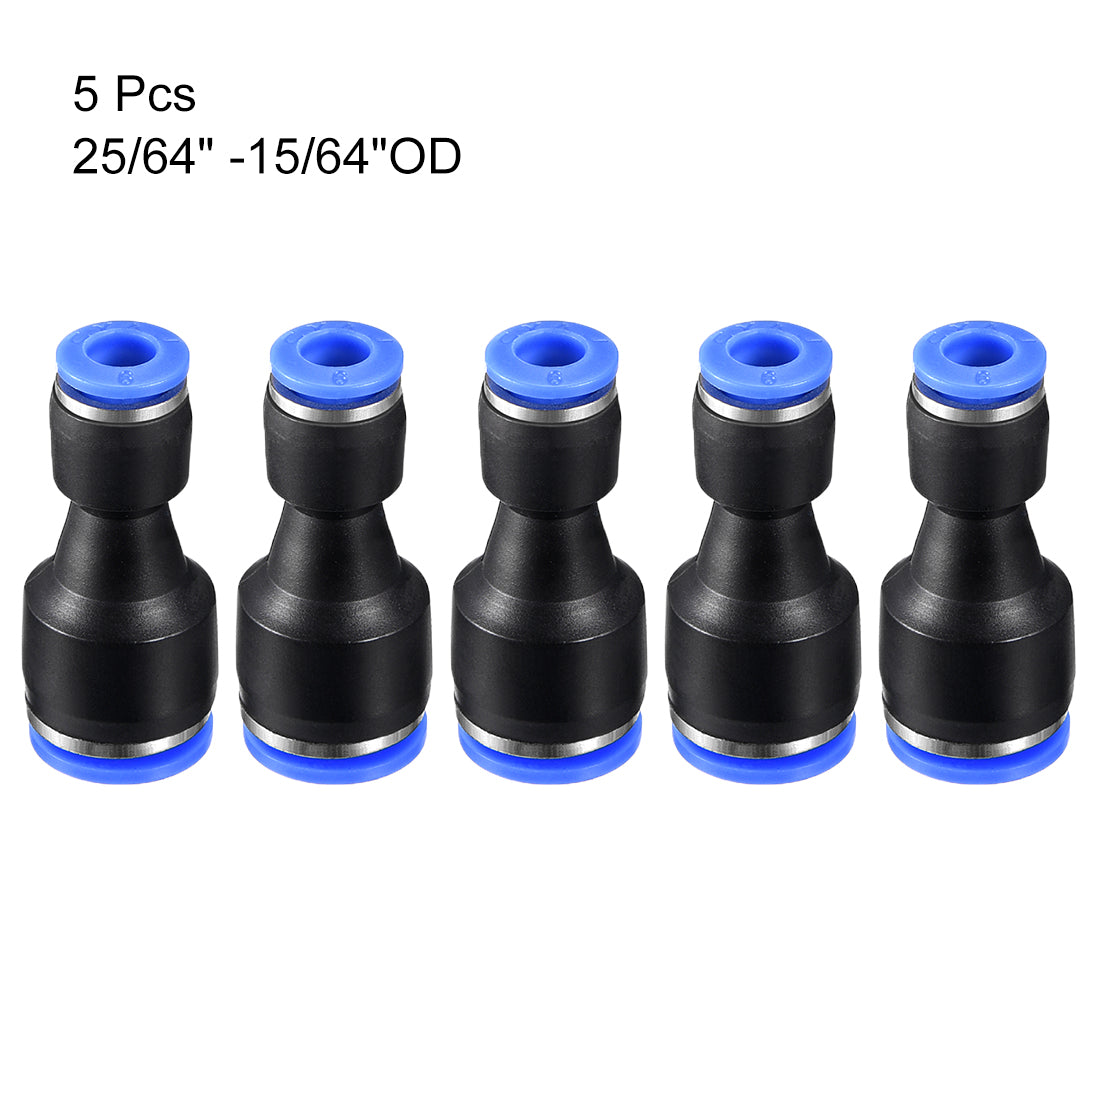 uxcell Uxcell 5pcs Push to Connect Fittings Tube Connect  25/64" -15/64" Straight OD Push Fit Fittings Tube Fittings Push Lock Blue